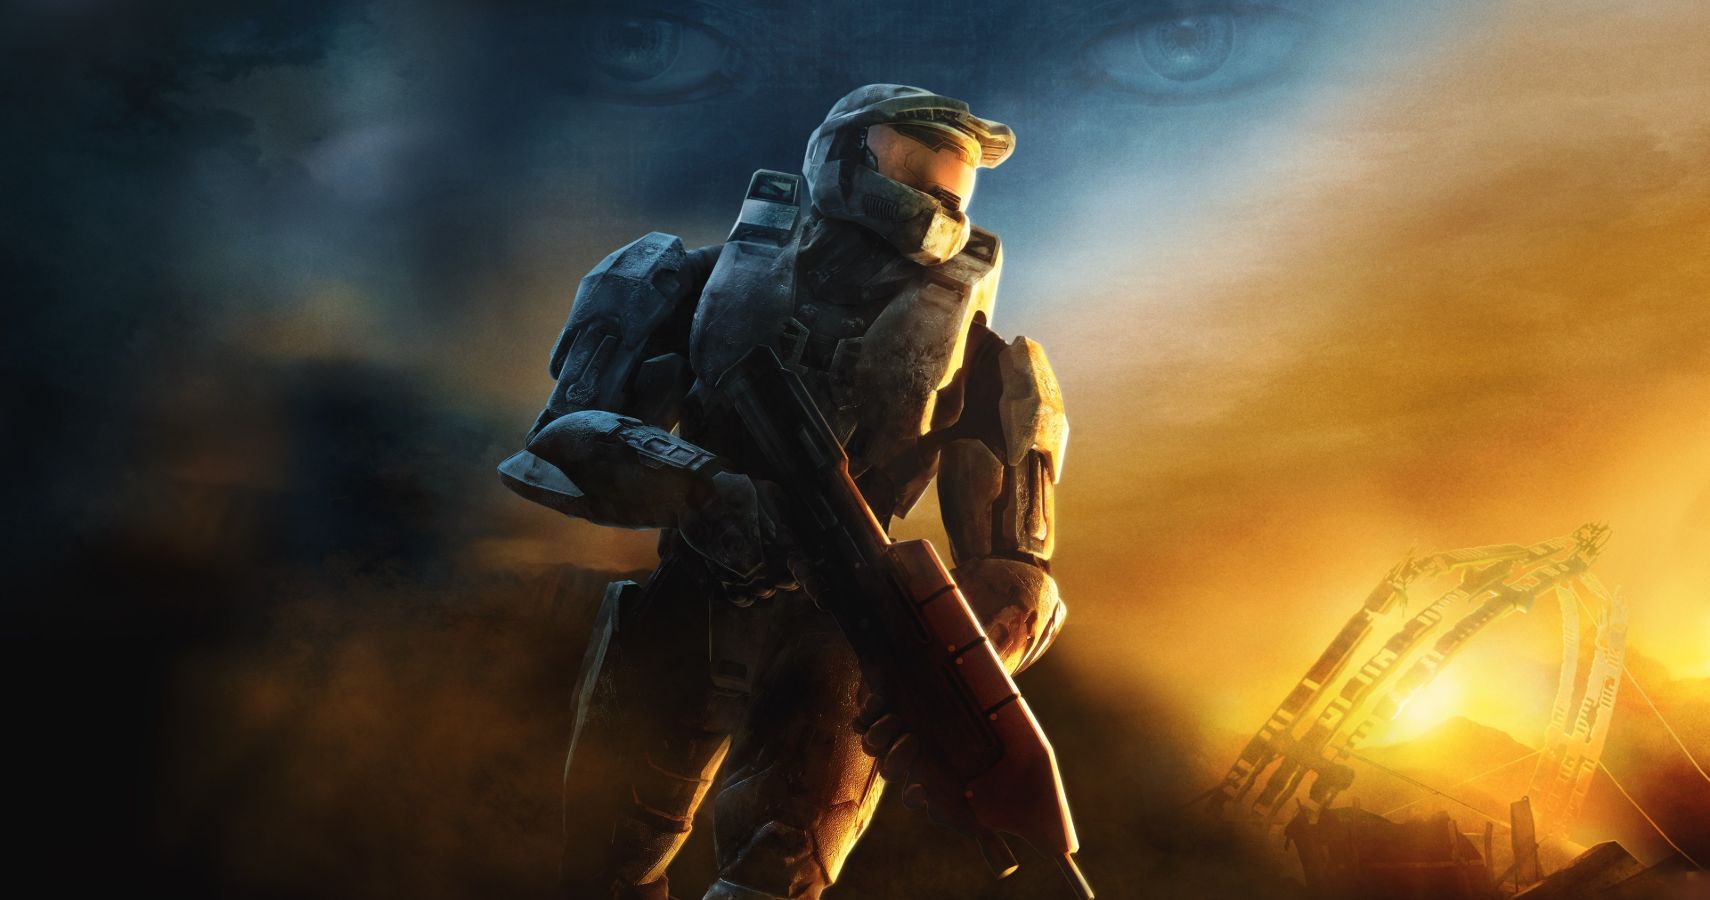 Halo 3 Gets New Multiplayer Map Tomorrow With Season 6